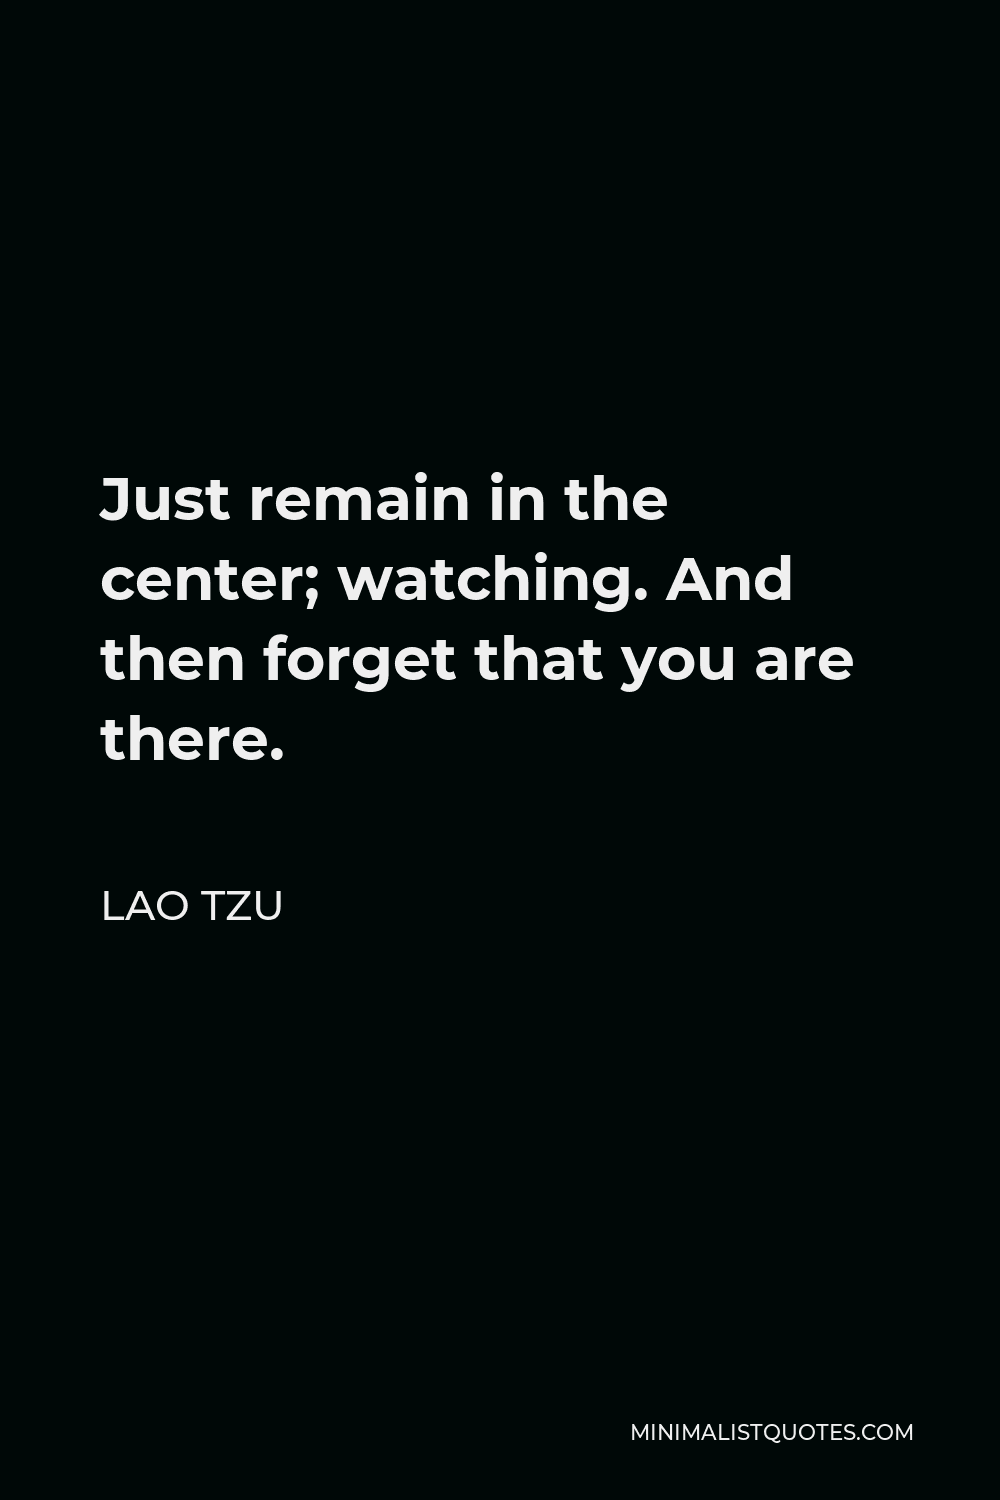 Lao Tzu Quote - Just remain in the center; watching. And then forget that you are there.